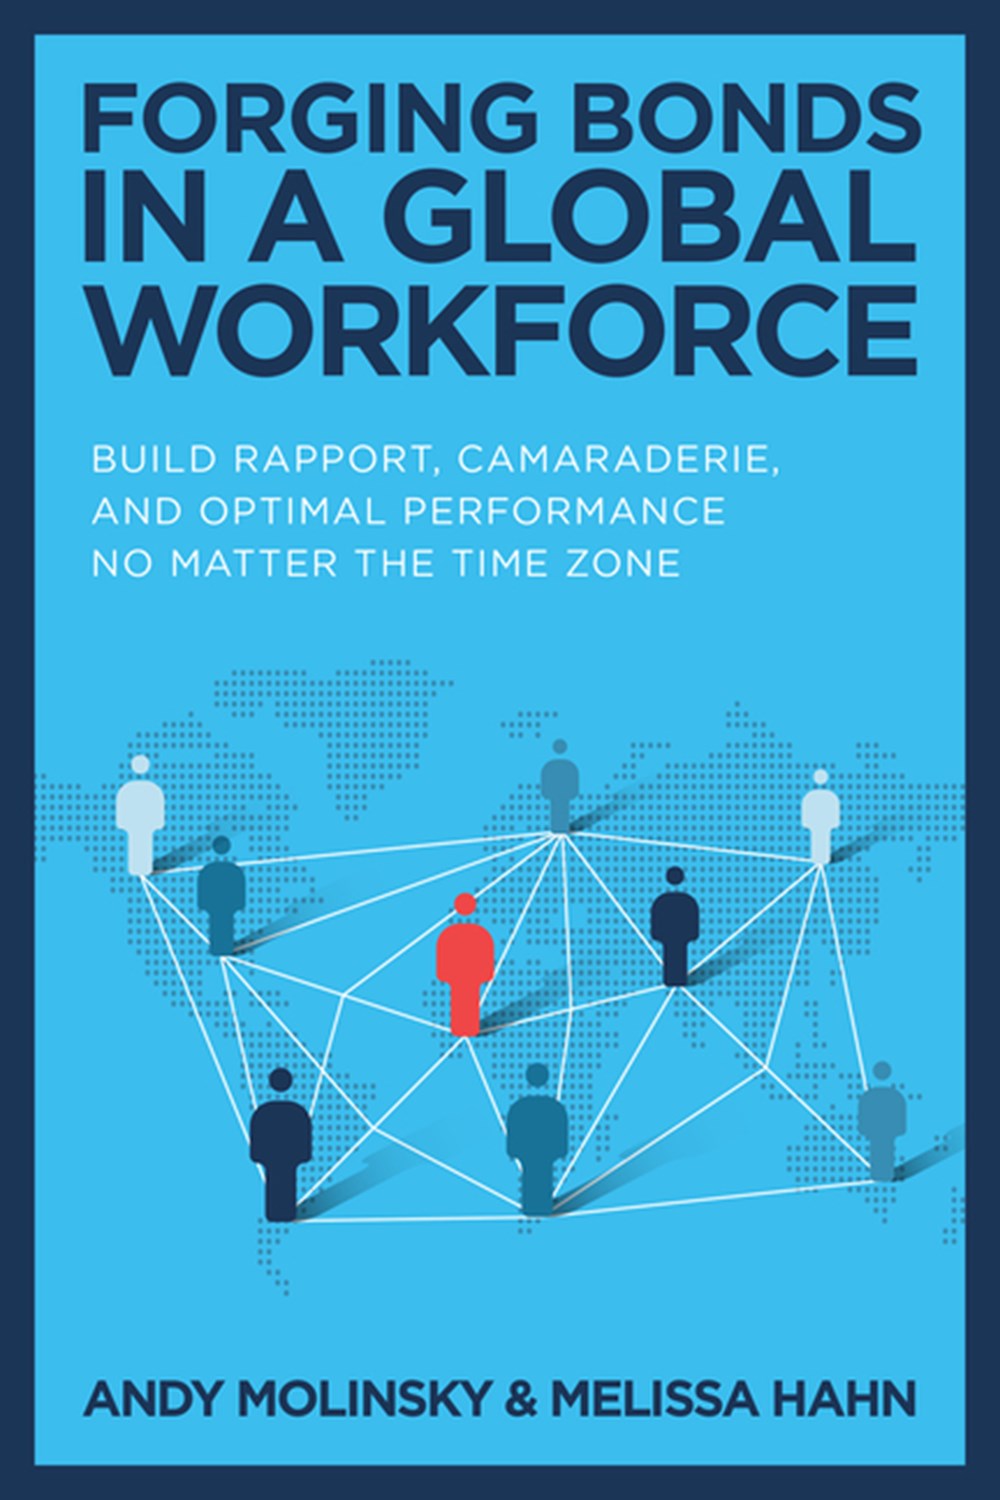 Forging Bonds in a Global Workforce: Build Rapport, Camaraderie, and Optimal Performance No Matter t